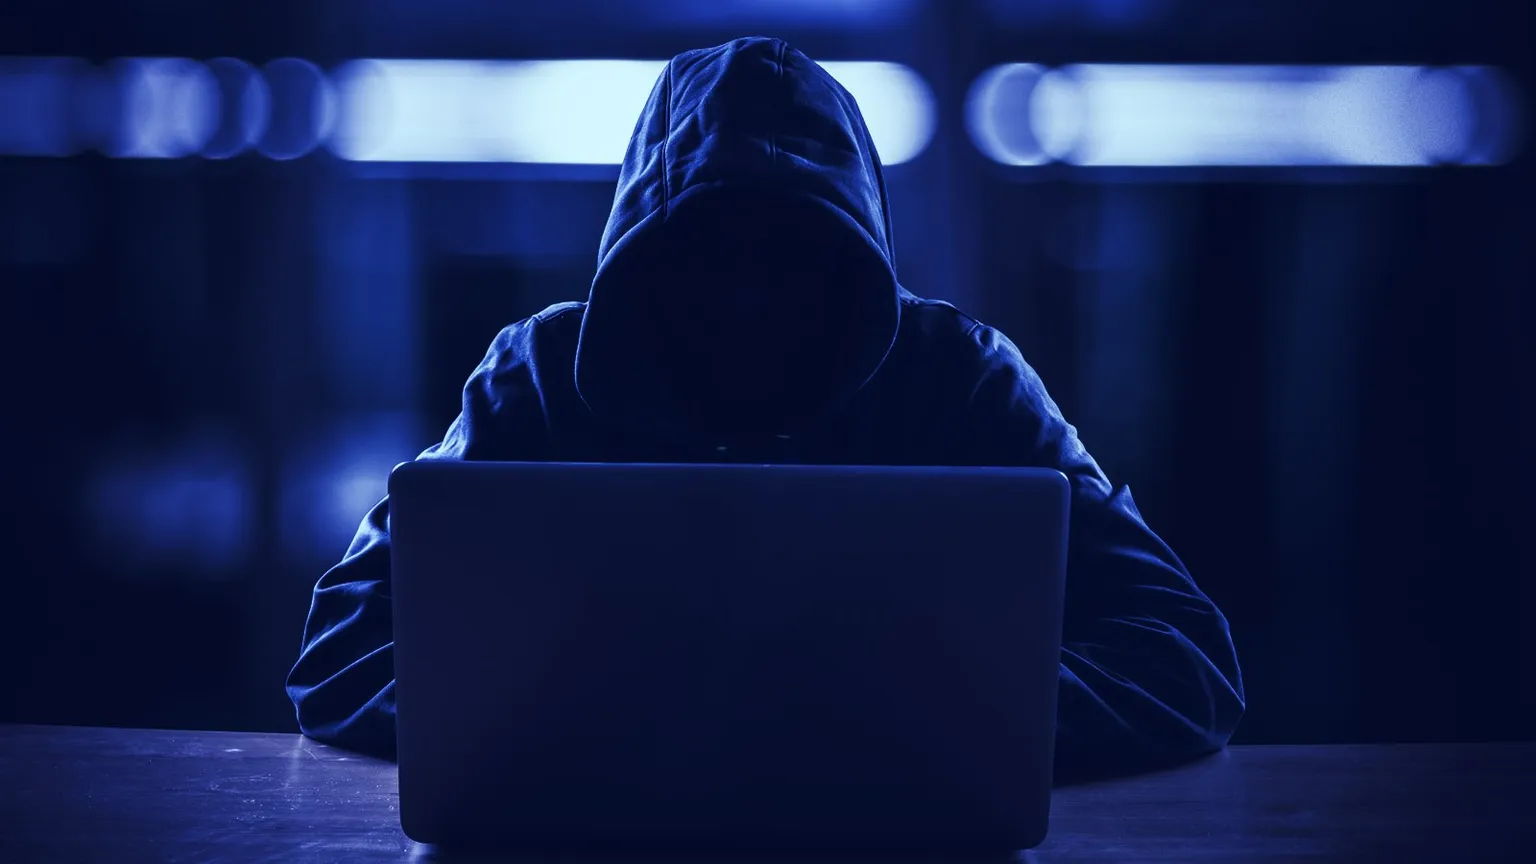 The crypto industry is full of hackers. Image: Shutterstock